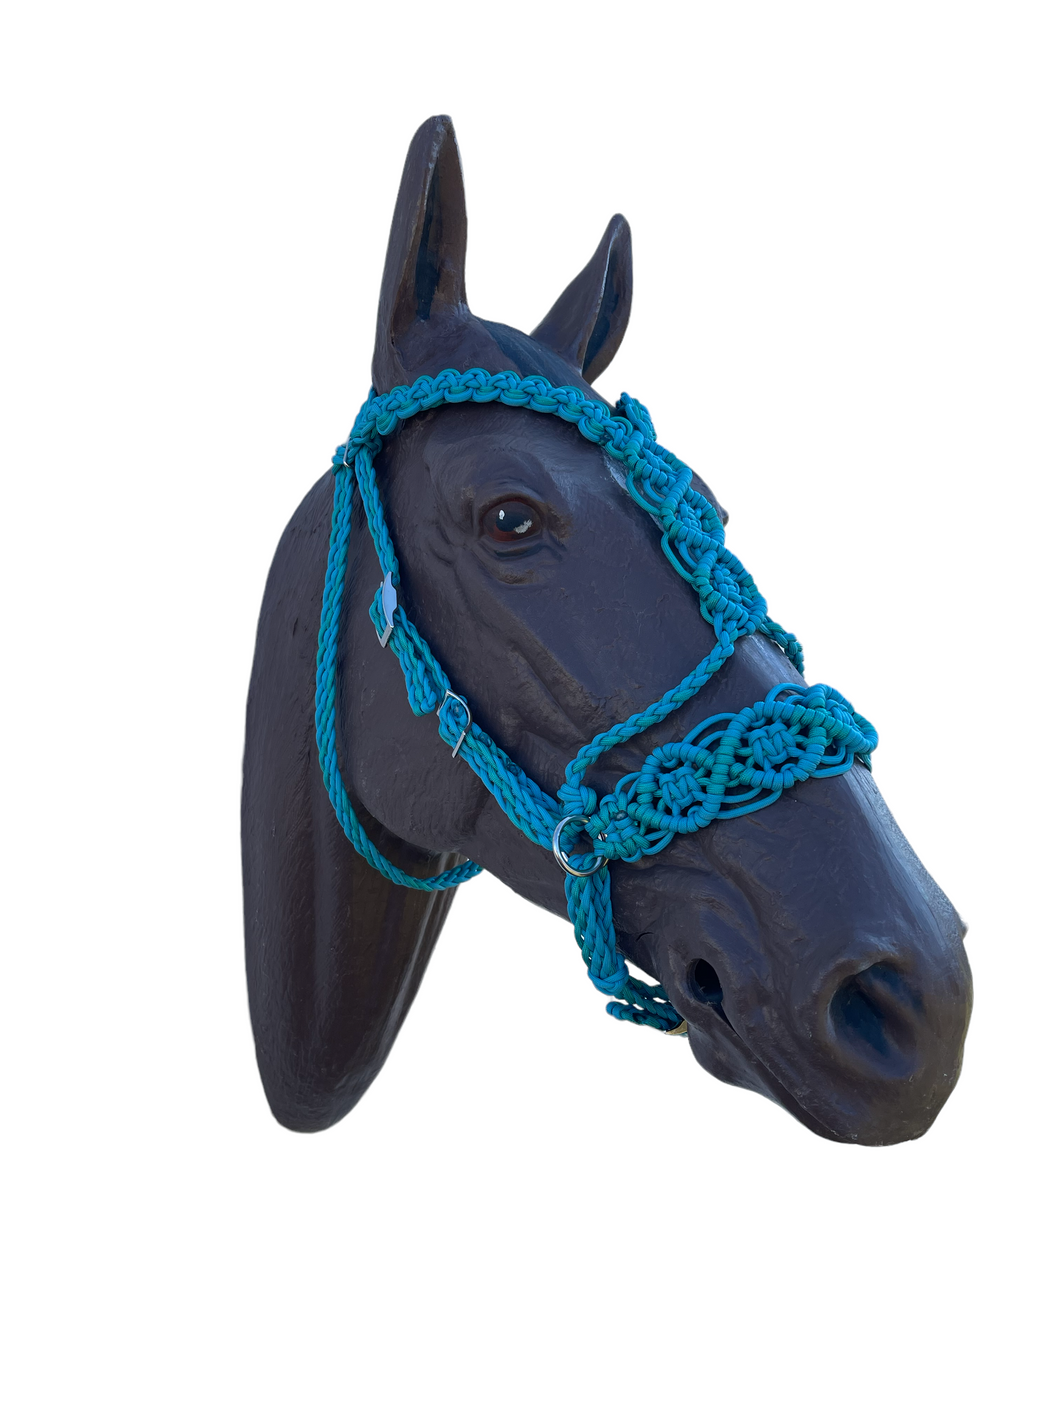 complete Bitless bridle side pull baroque style in green turquoise and neon turquoise